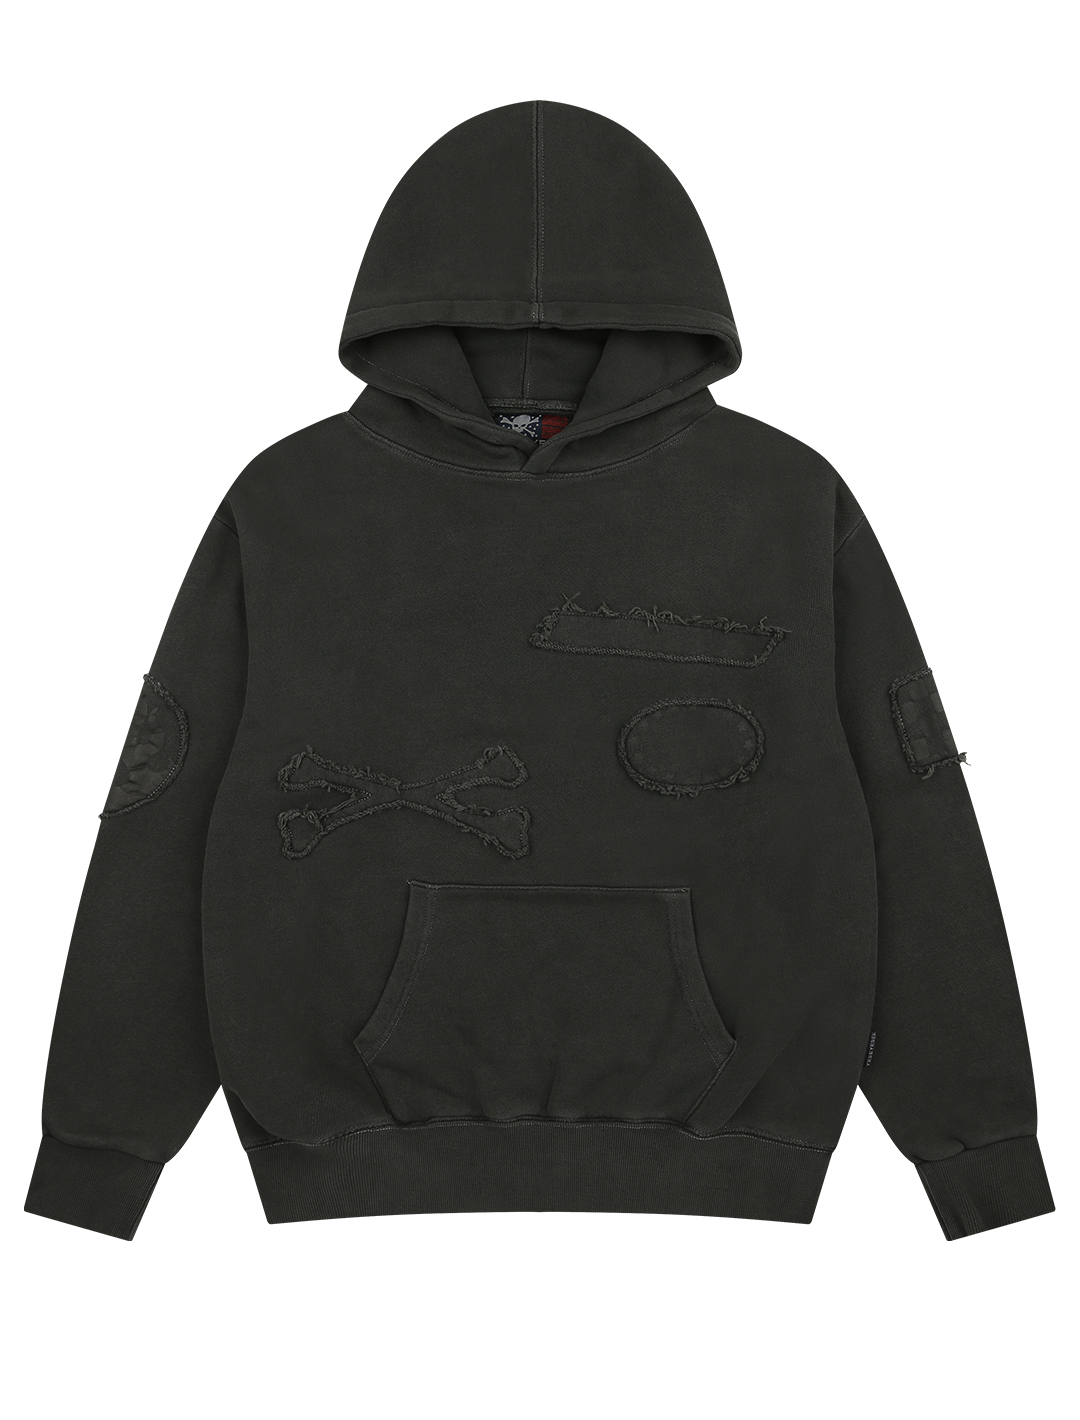 YESEYESEE X Insane Garage Pigment Patched Hoodie Charcoal